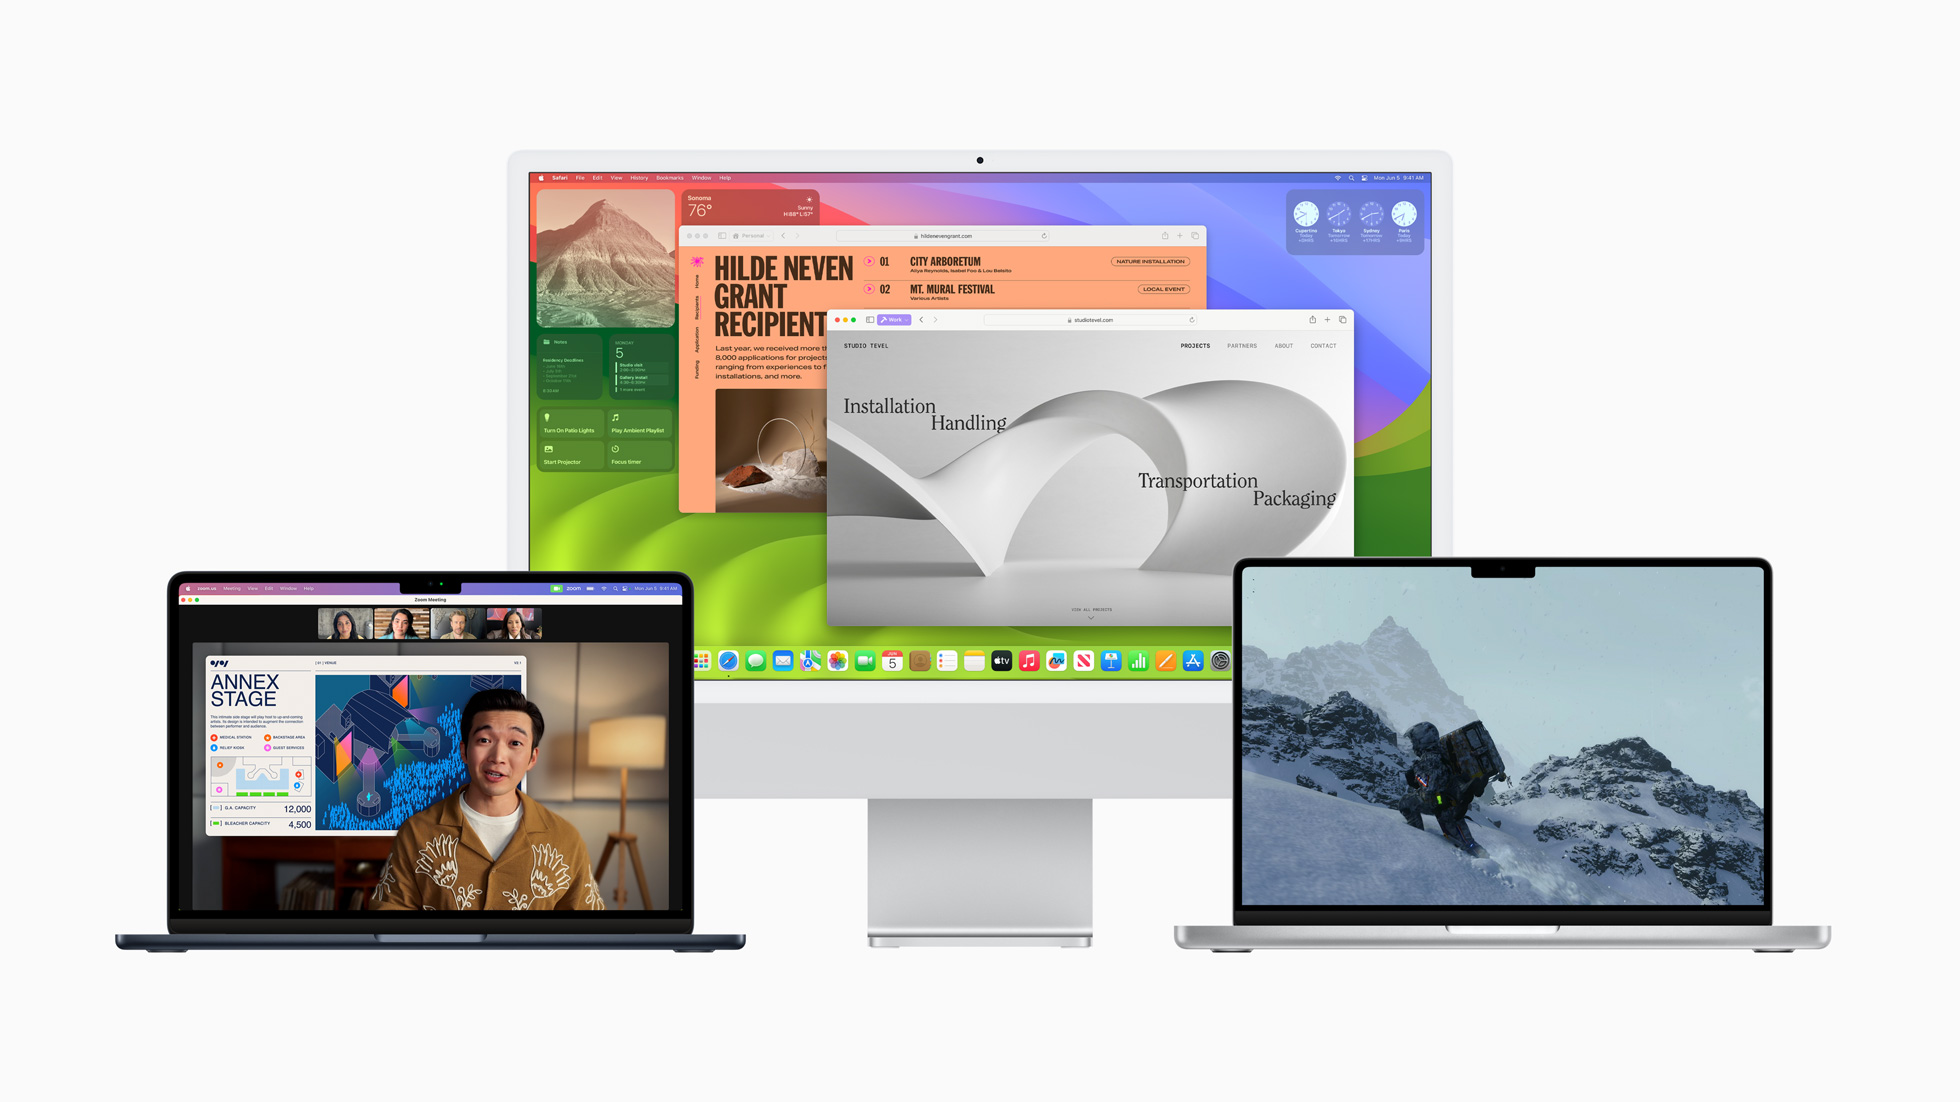 macOS Sonoma: improved widgets, game mode and new features for video conferencing